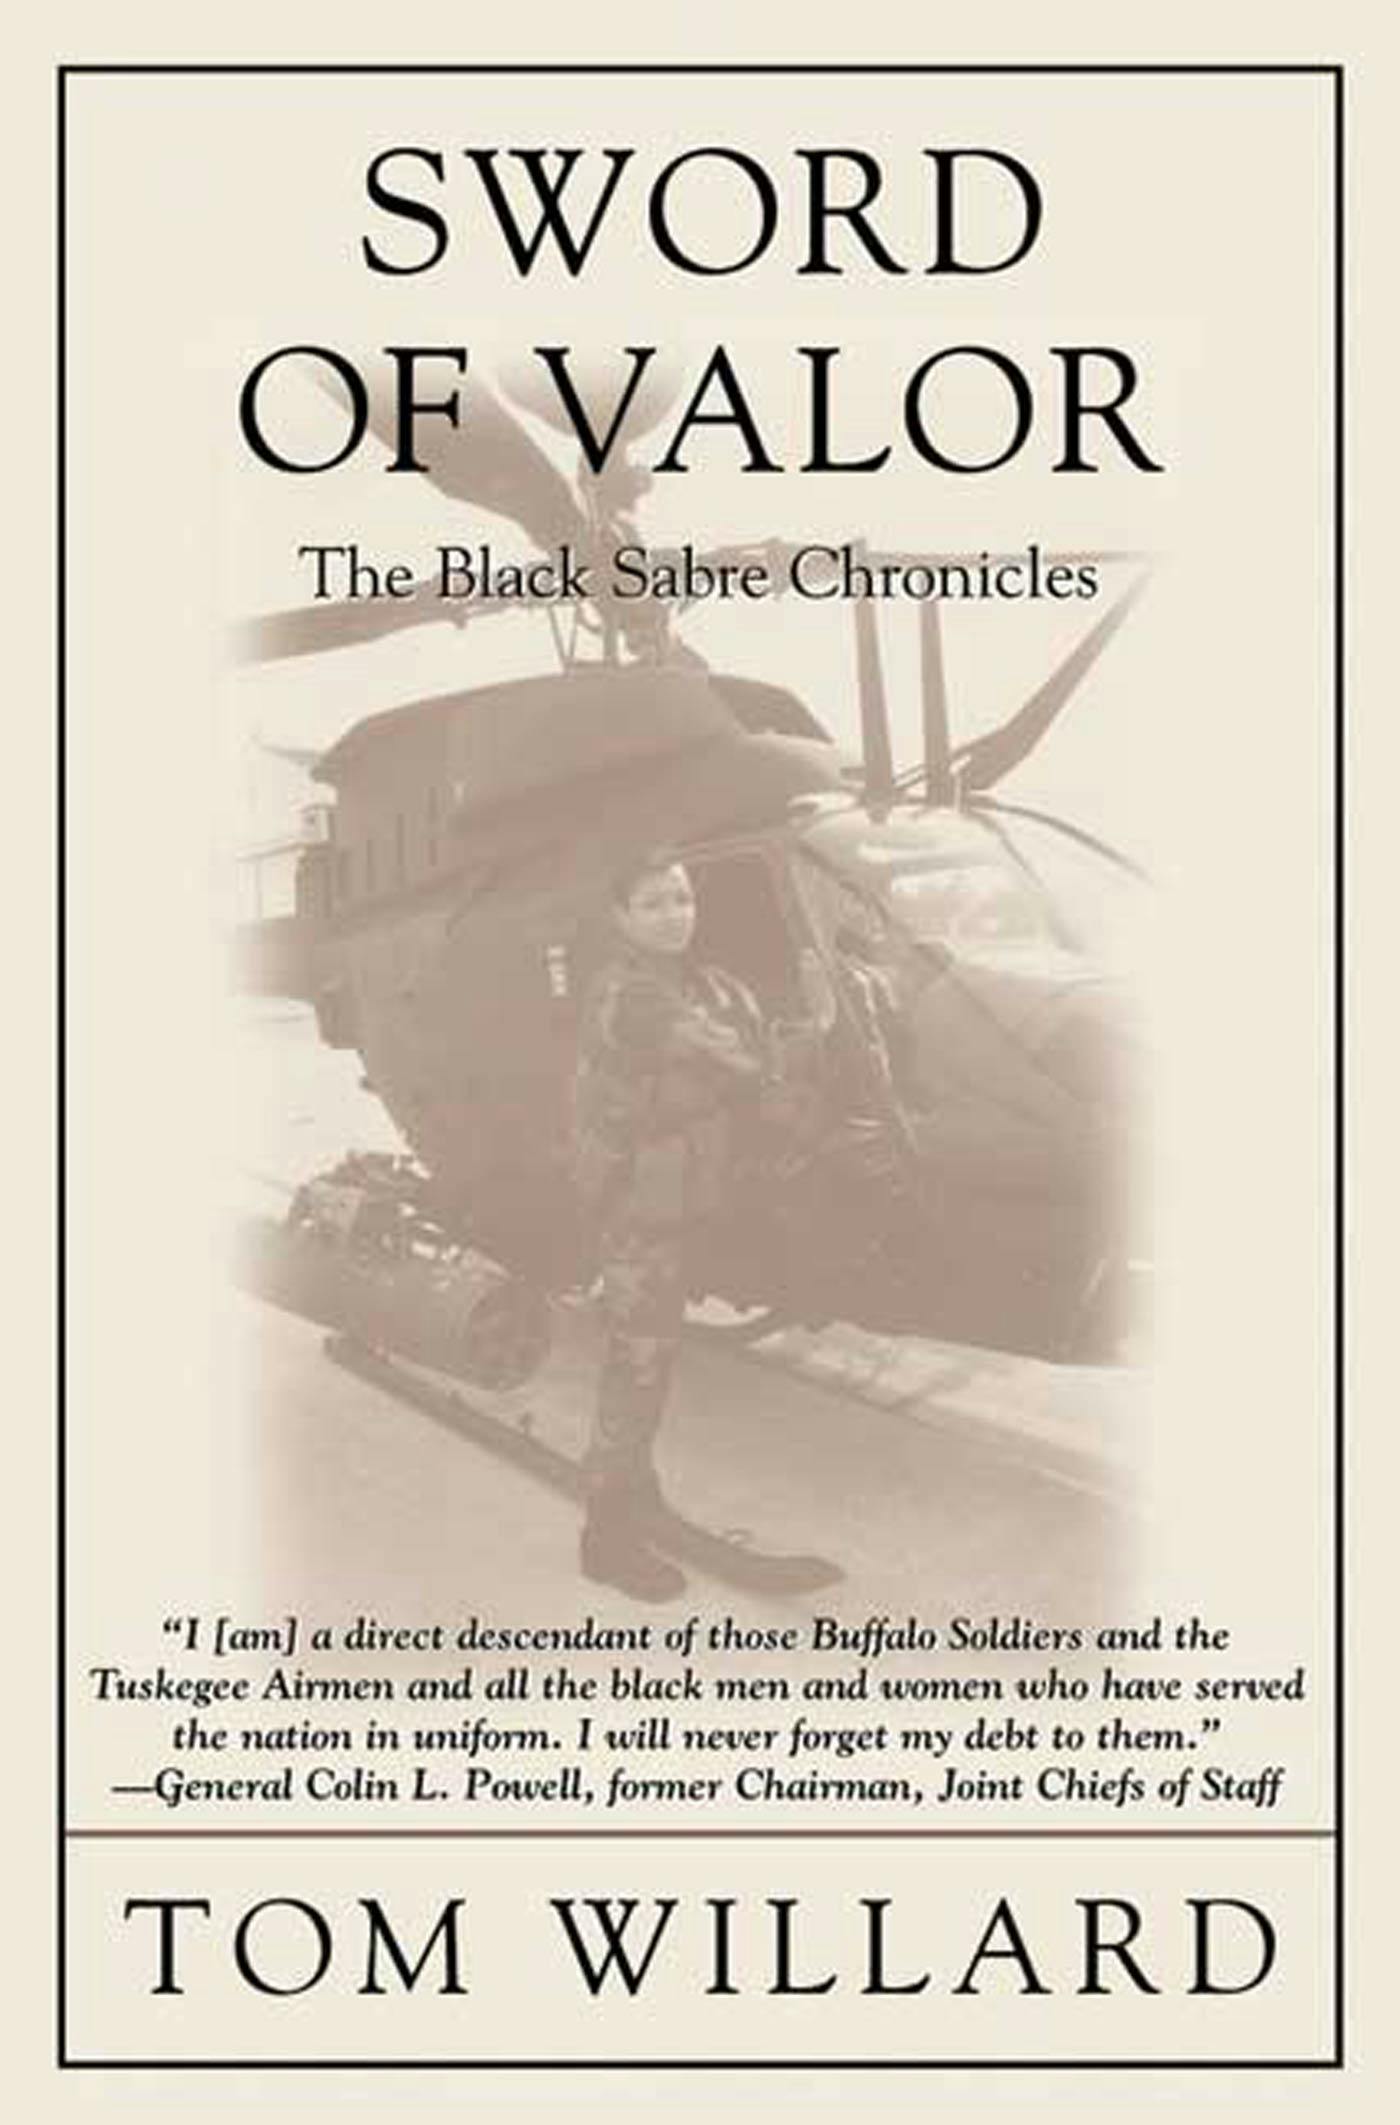 Cover for the book titled as: Sword of Valor